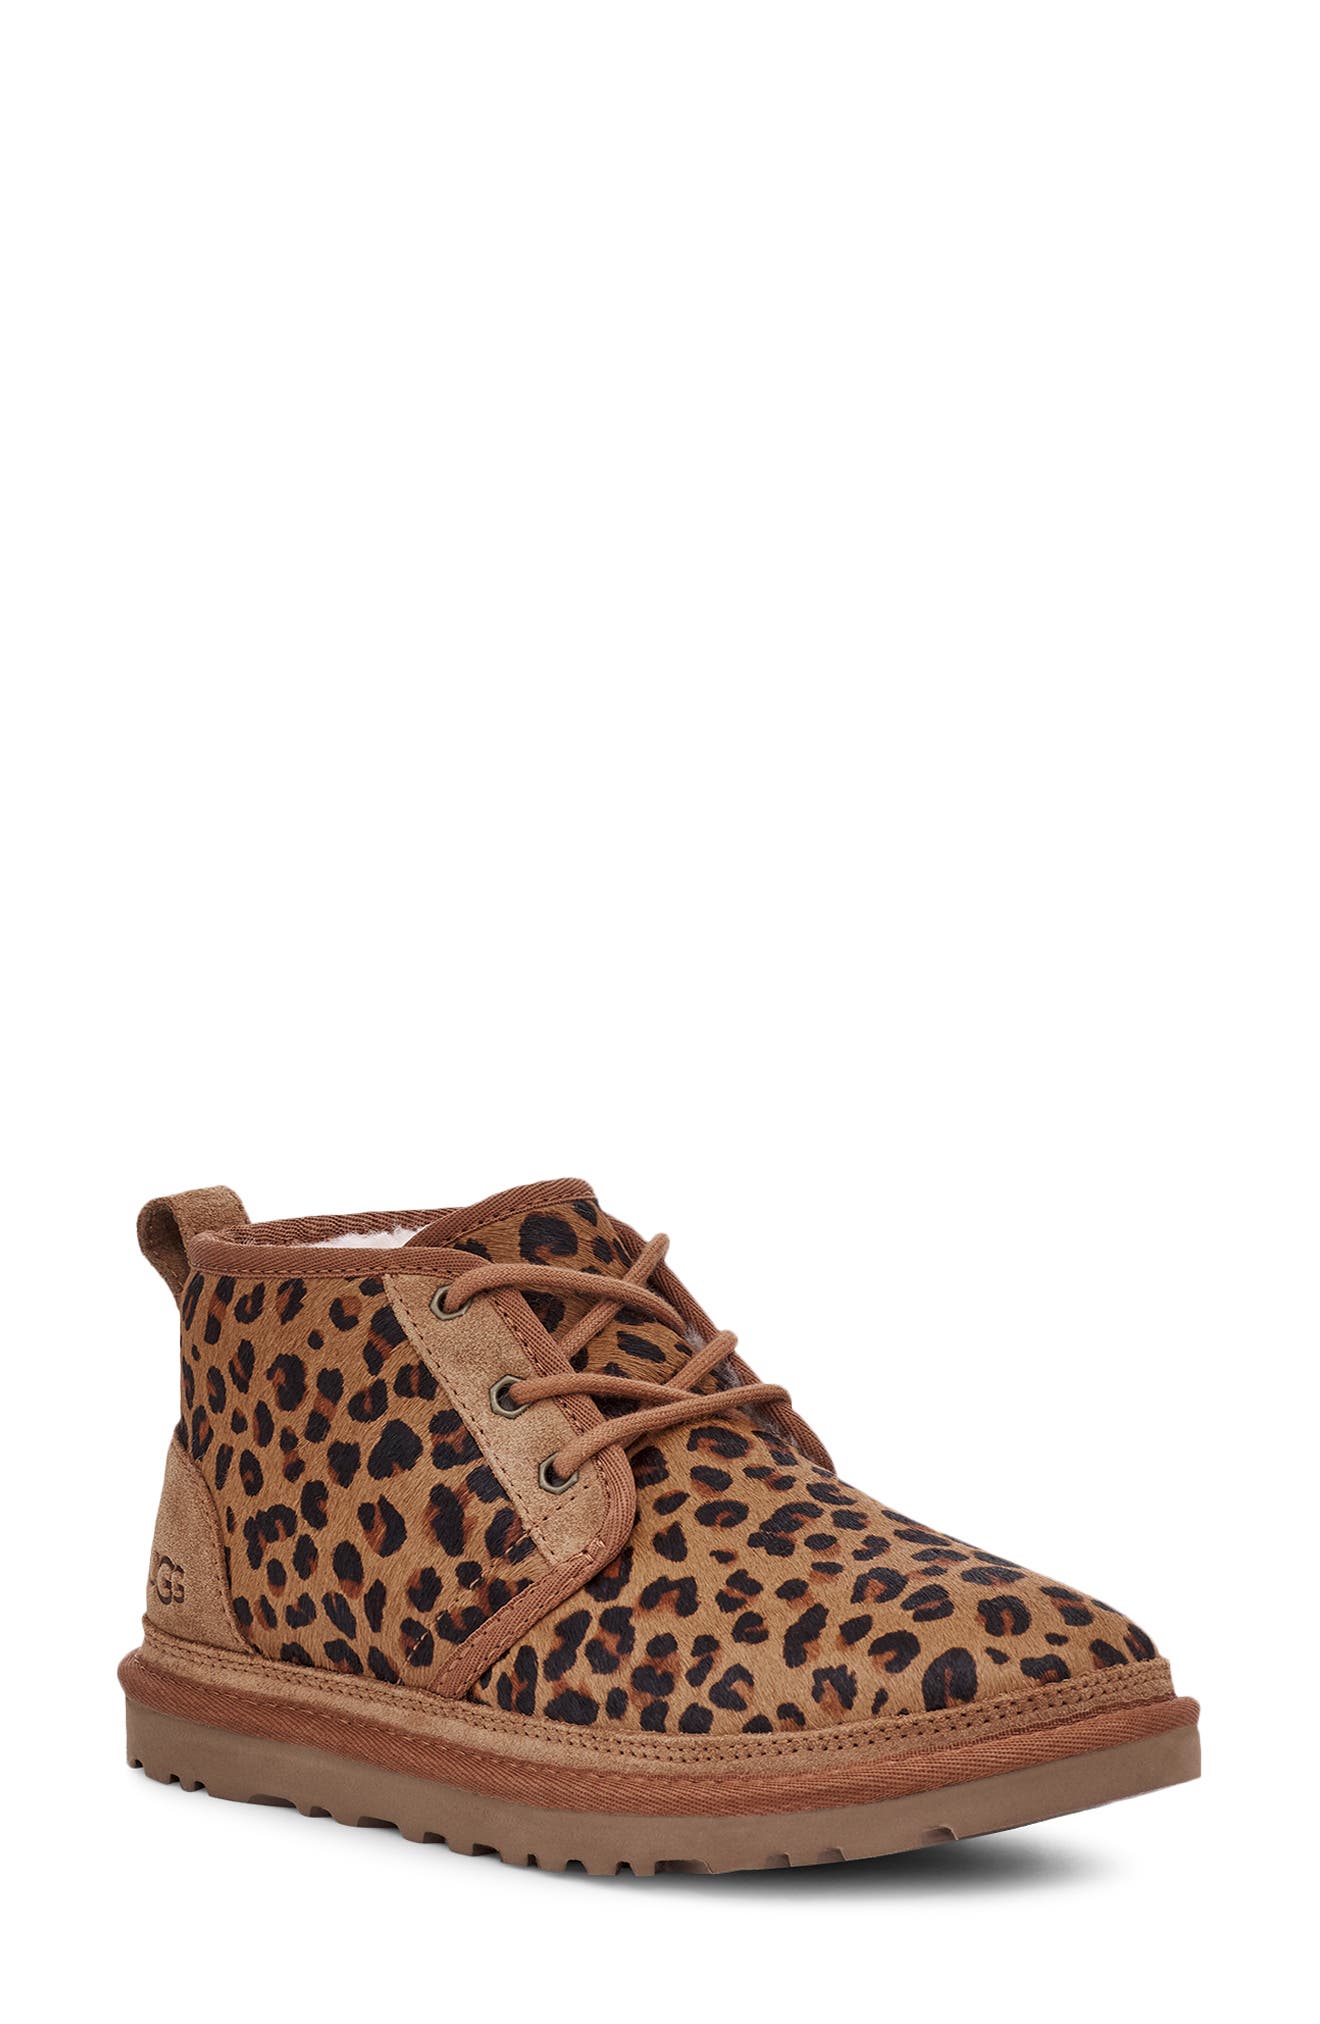 Ugg Neumel Faux Fur Lined Chukka Boot In Leopard Print Suede | ModeSens